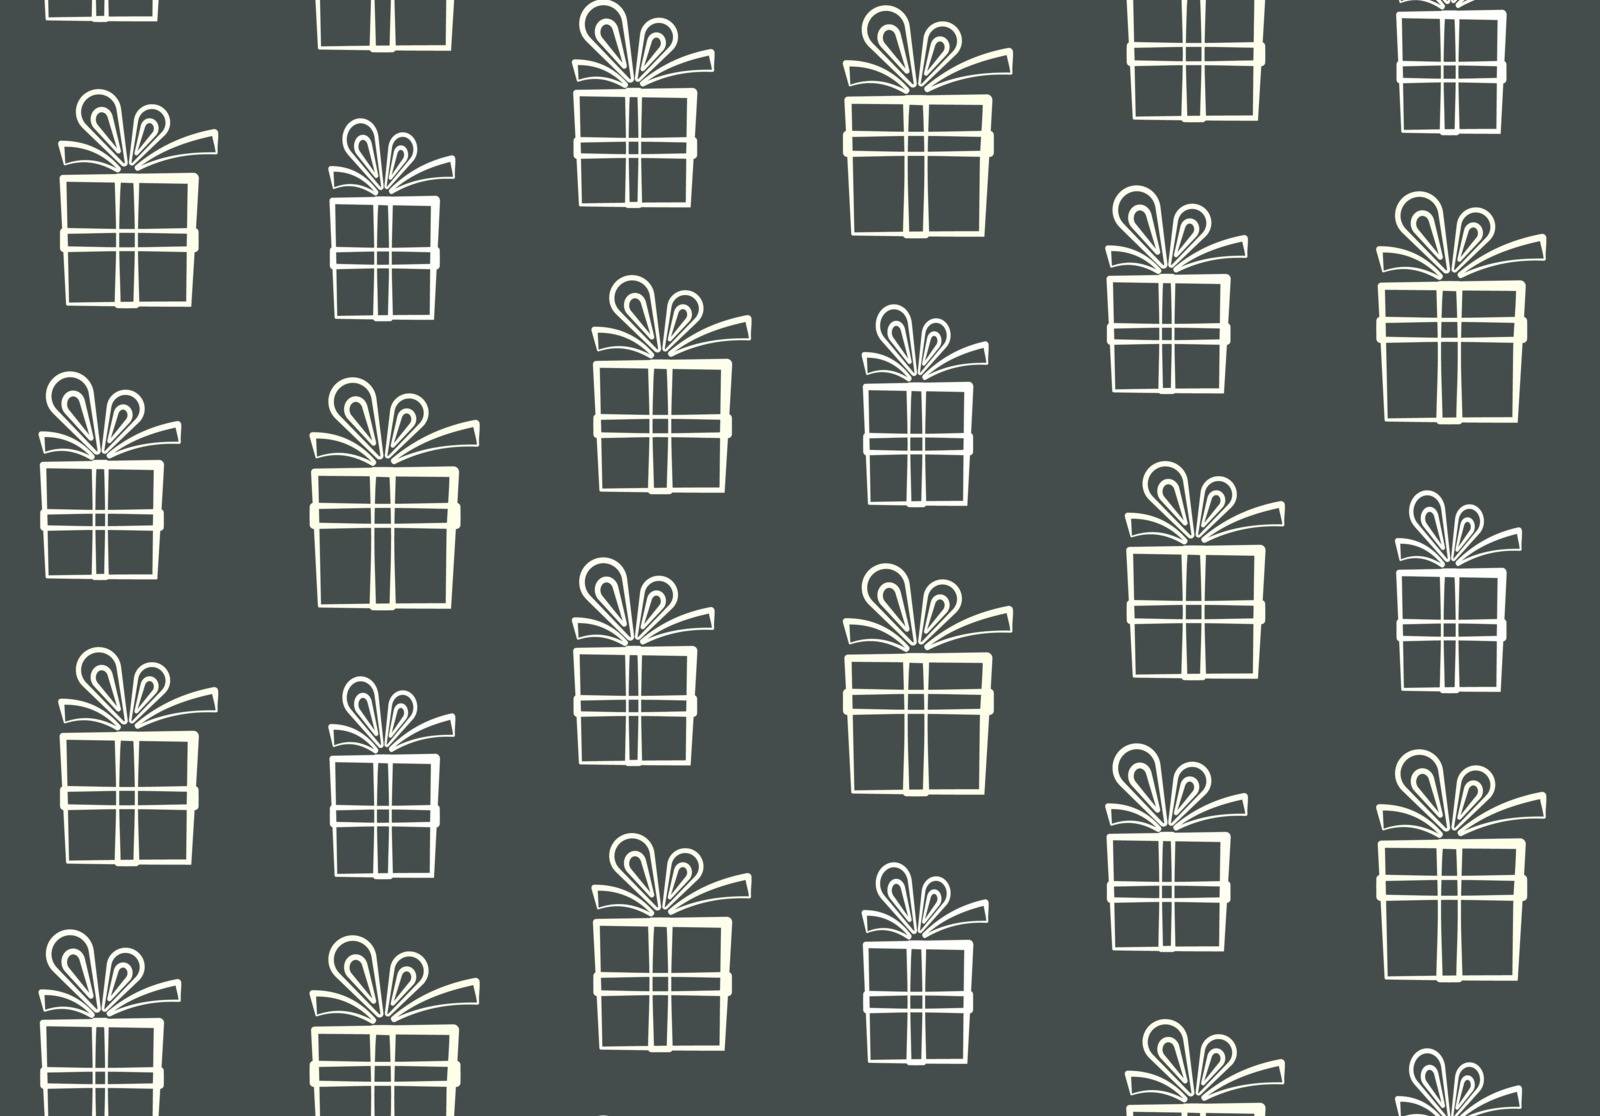 Cute outline white gift boxes pattern by tatahnka